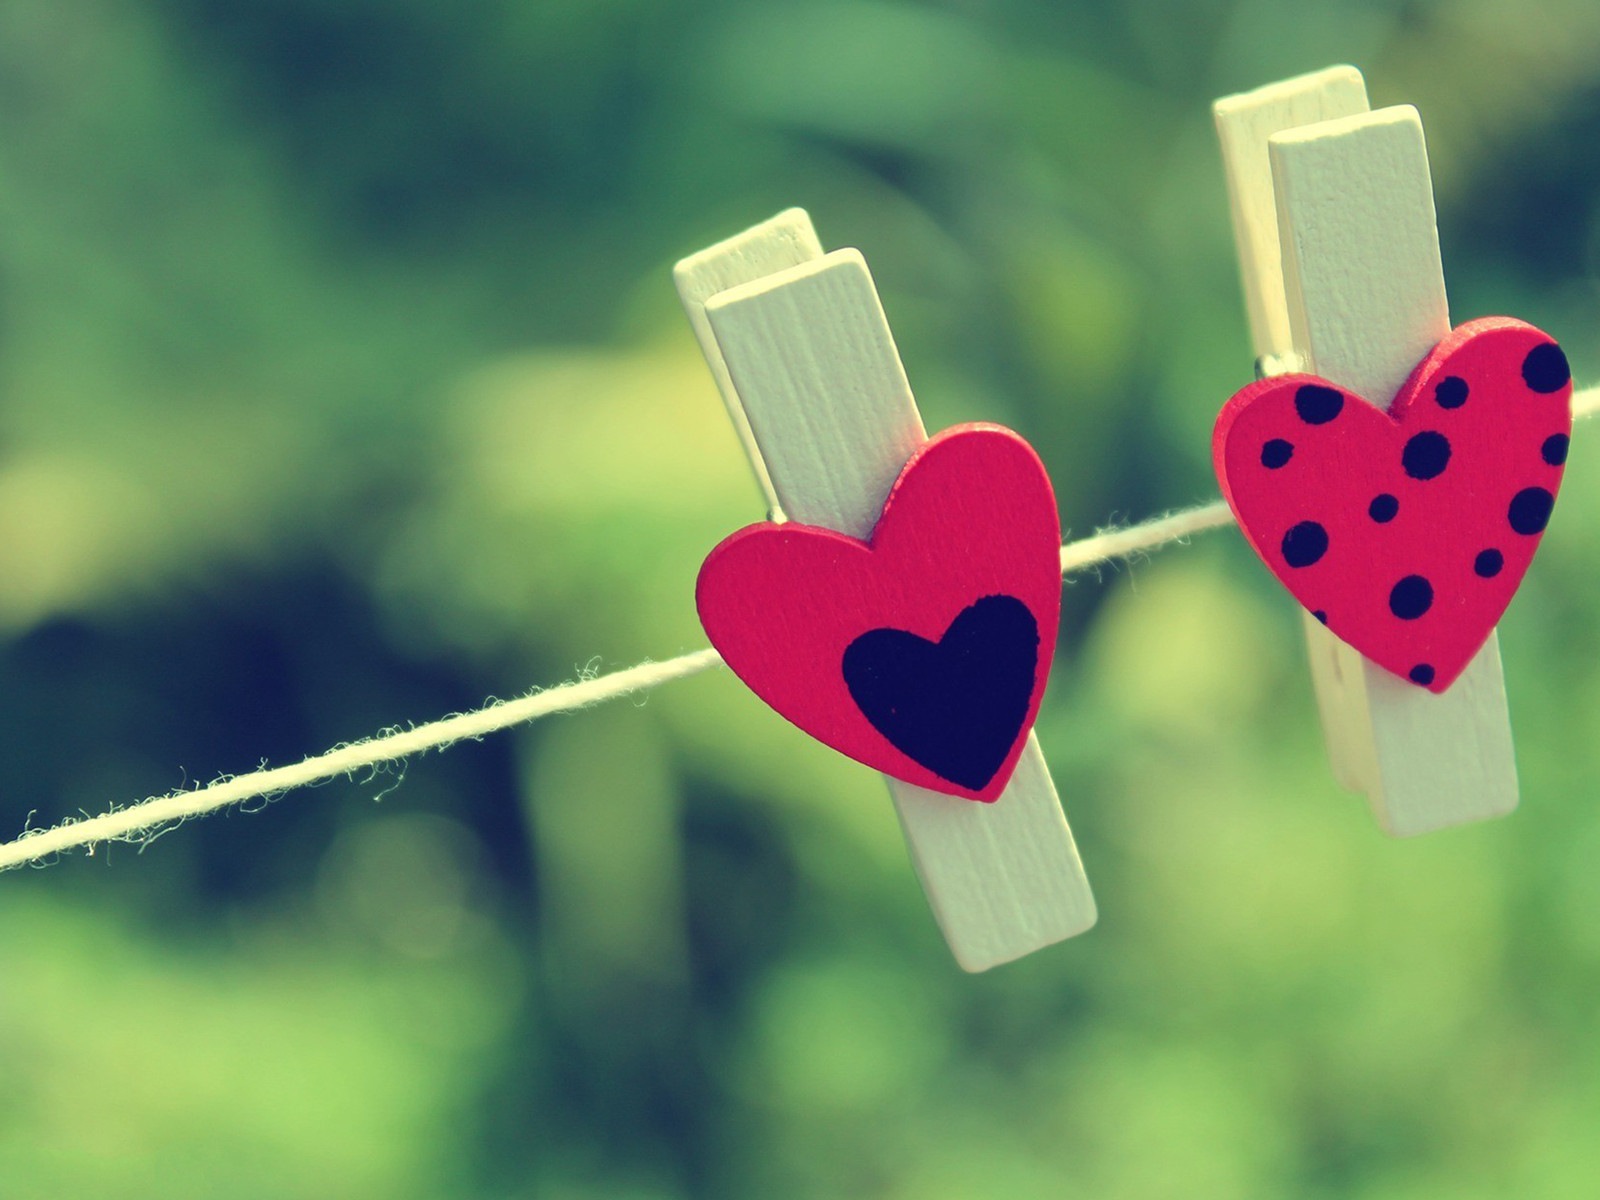 The theme of love, creative heart-shaped HD wallpapers #18 - 1600x1200